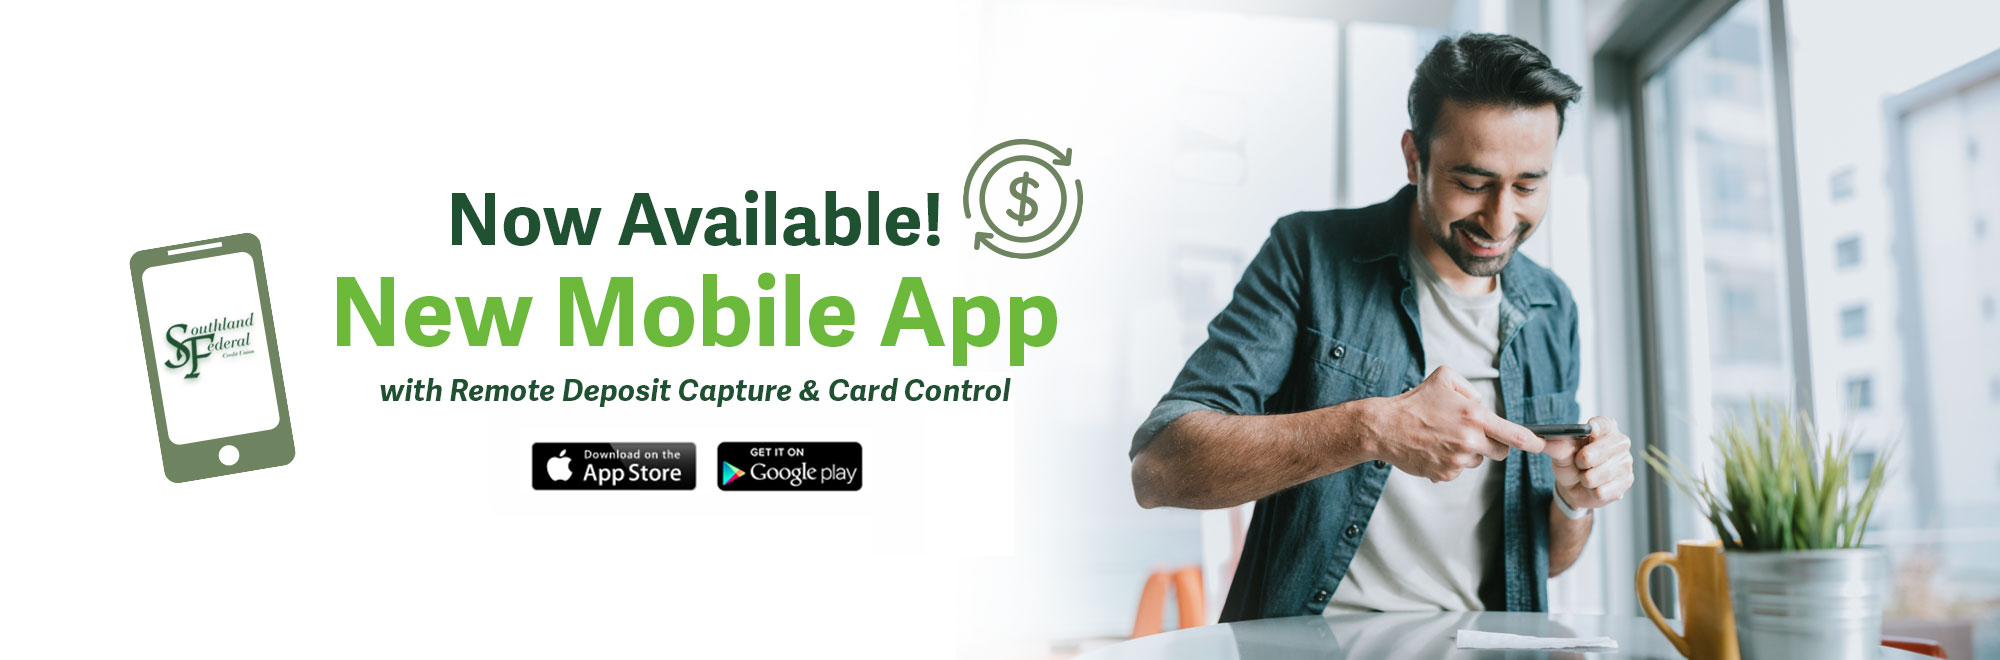 Now Available! New Mobile App with remote deposit capture & card control. Get it on the App Store or Google Play. 